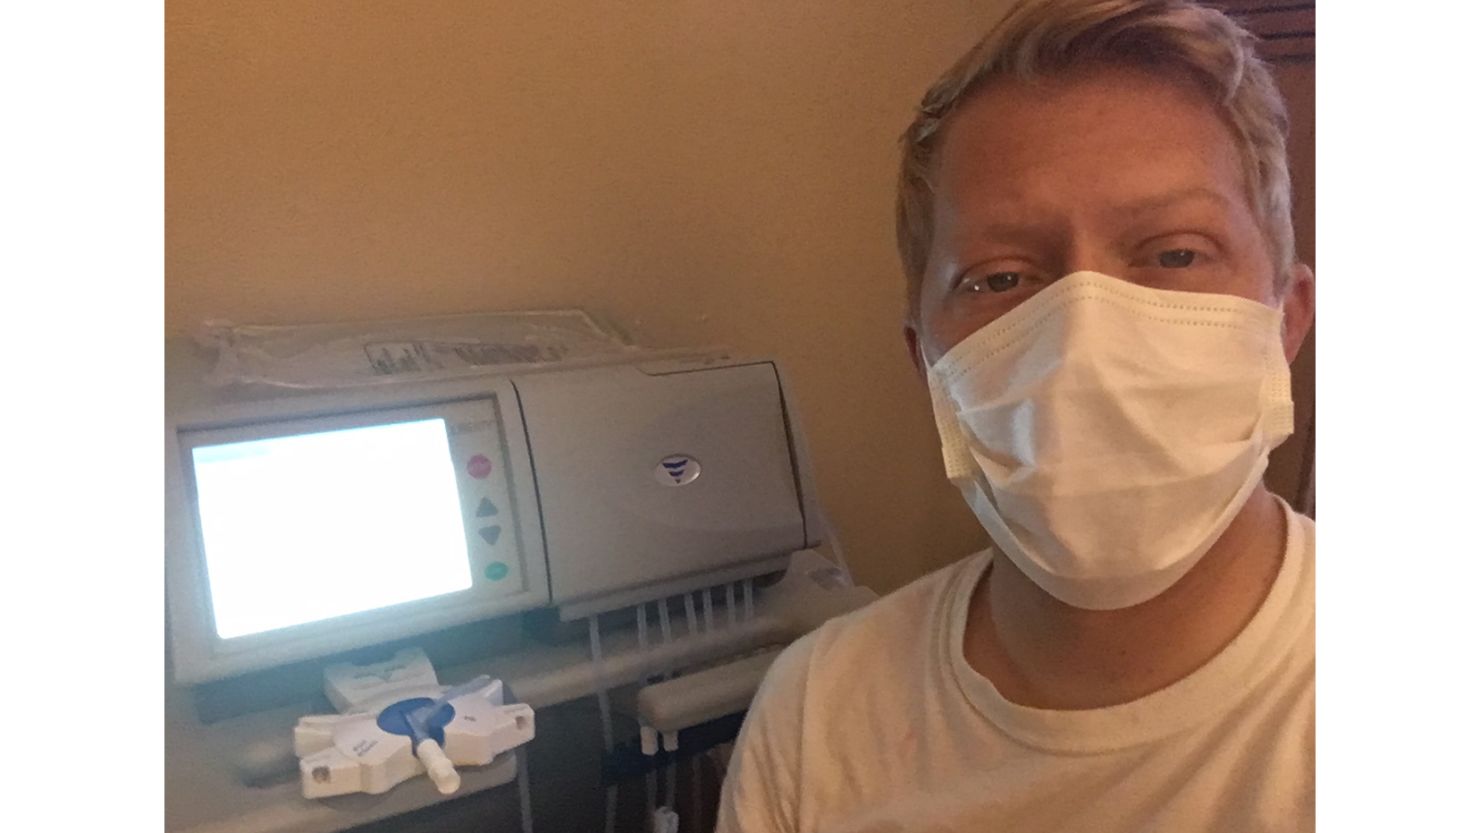 Dustin Cuzick, 35, uses a peritoneal dialysis machine at home every night. He was one of 232 patients waiting for an organ transplant at Porter Adventist Hospital, which temporarily shut down its transplant program.